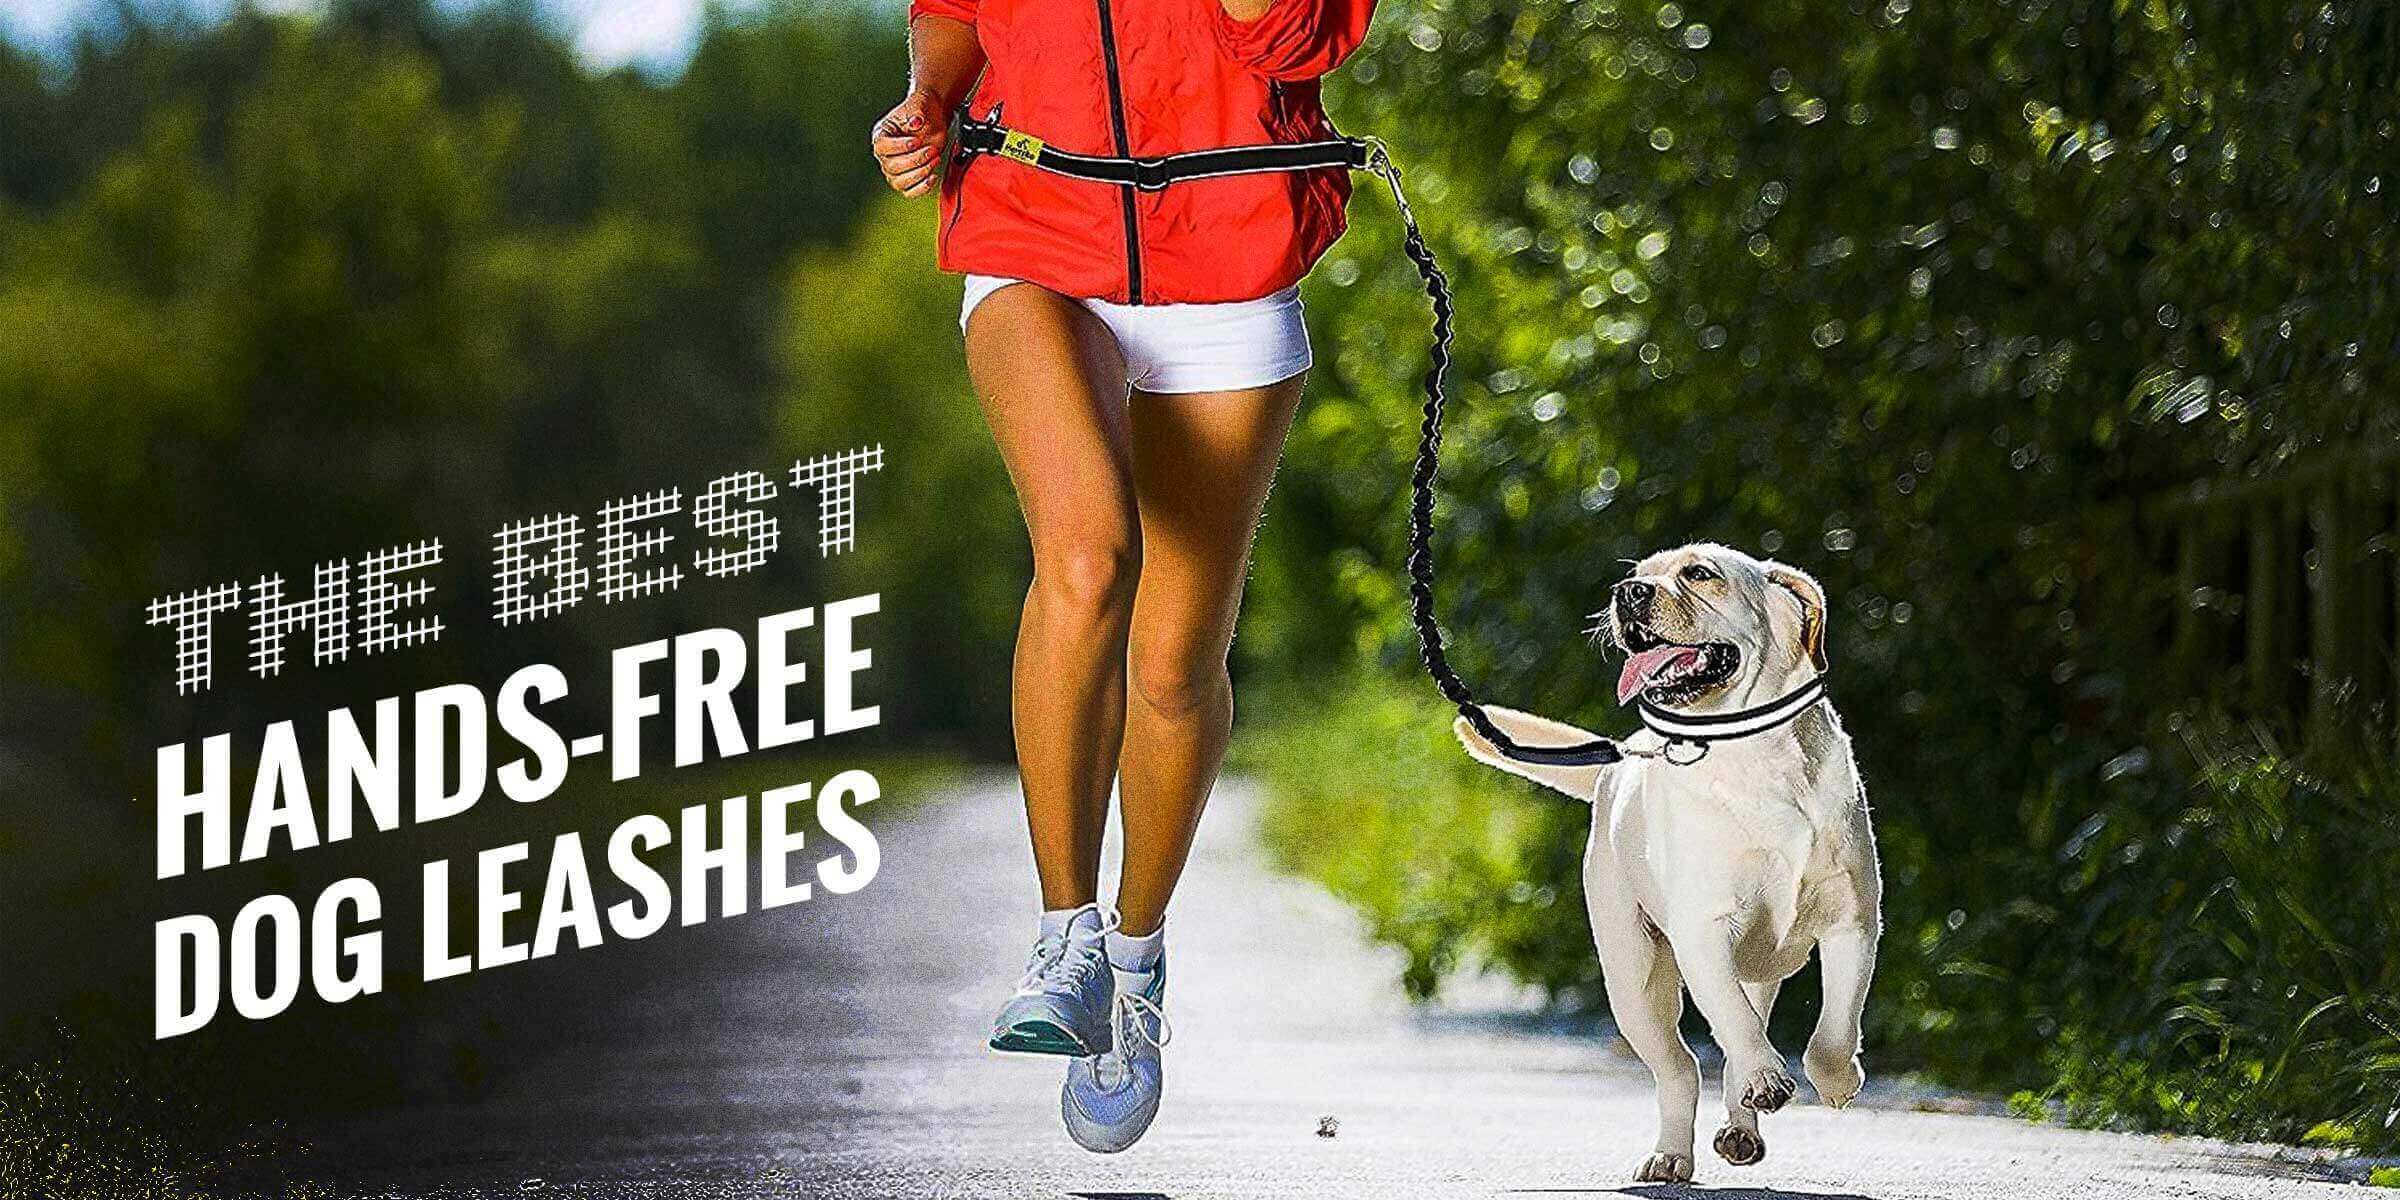 best leads for dogs that pull